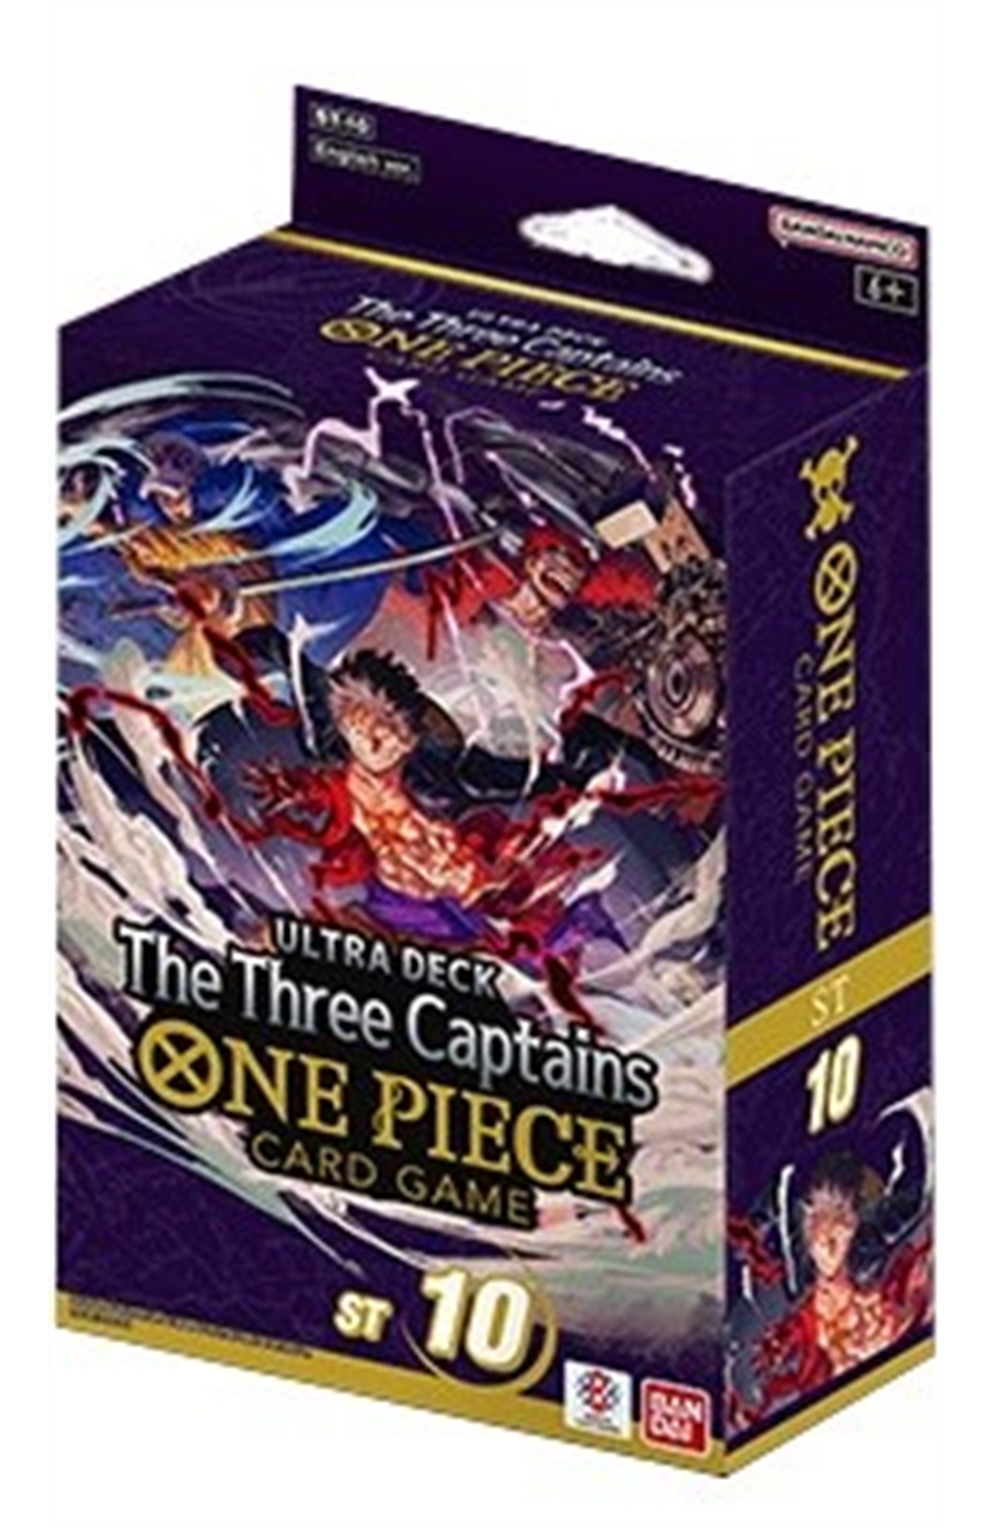 One Piece TCG: Ultra Deck - The Three Captains [St-10]